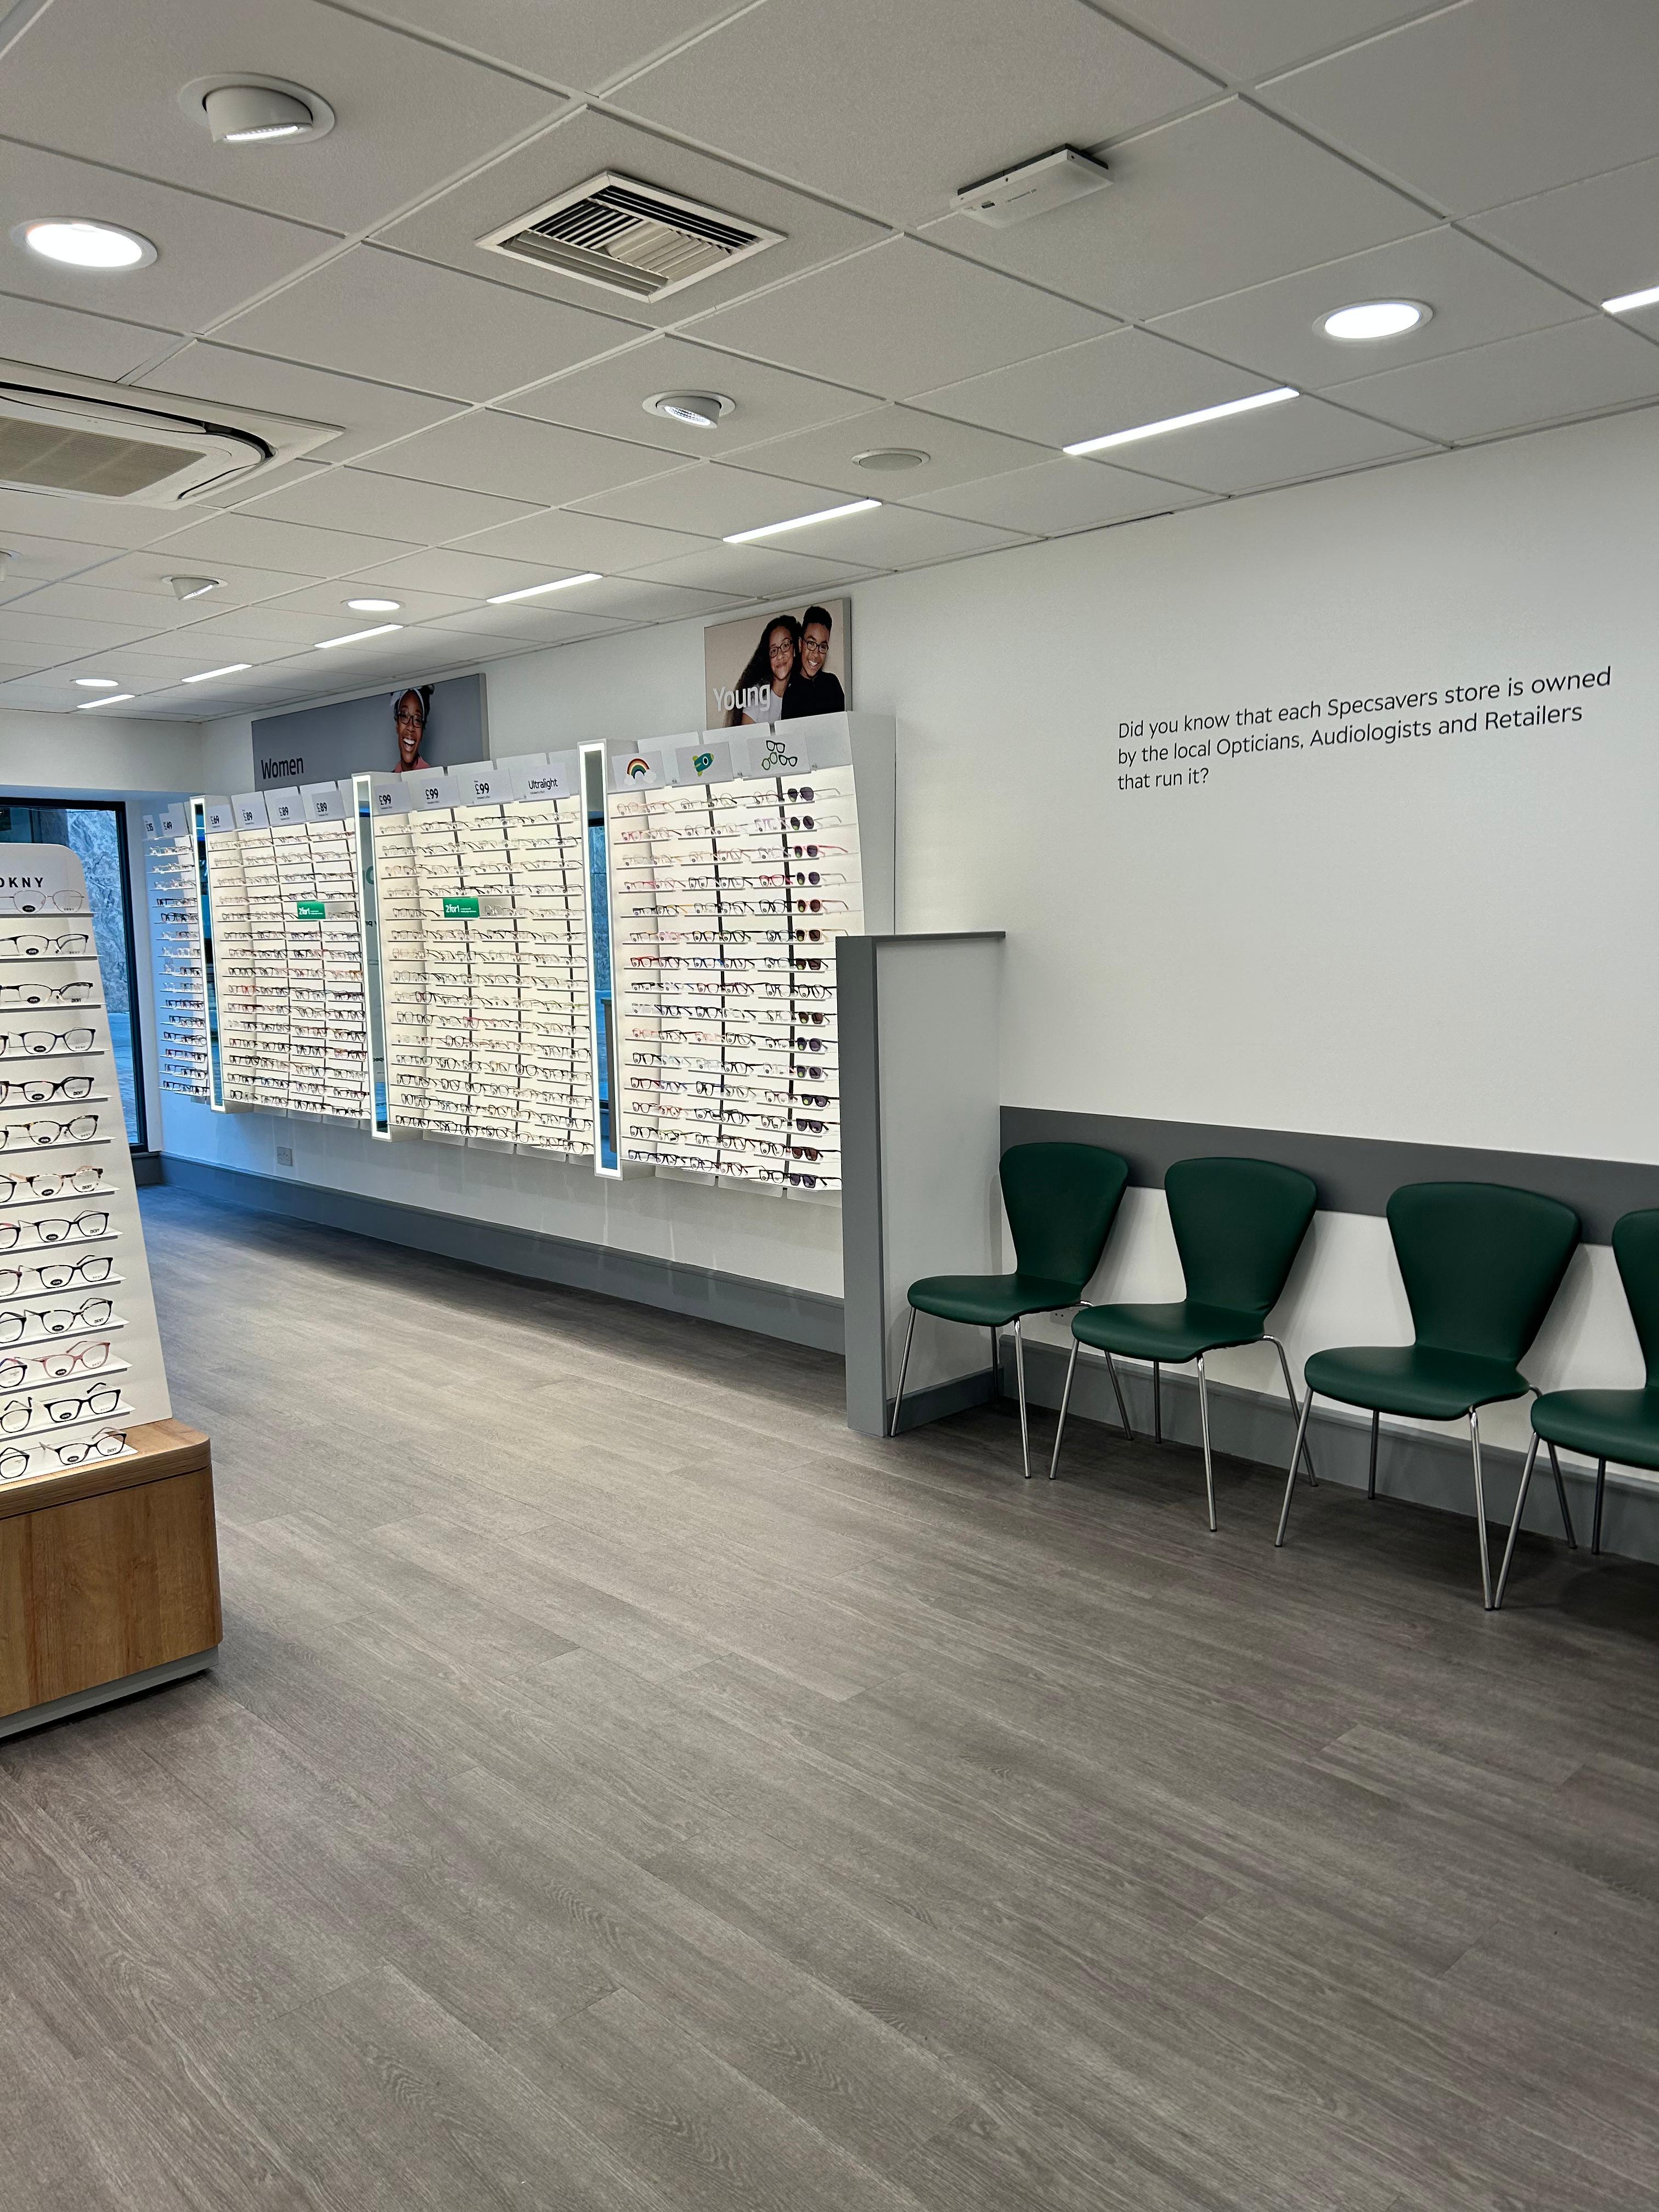 Specsavers Opticians and Audiologists - Dunfermline Specsavers Opticians and Audiologists - Dunfermline Dunfermline 01383 730050